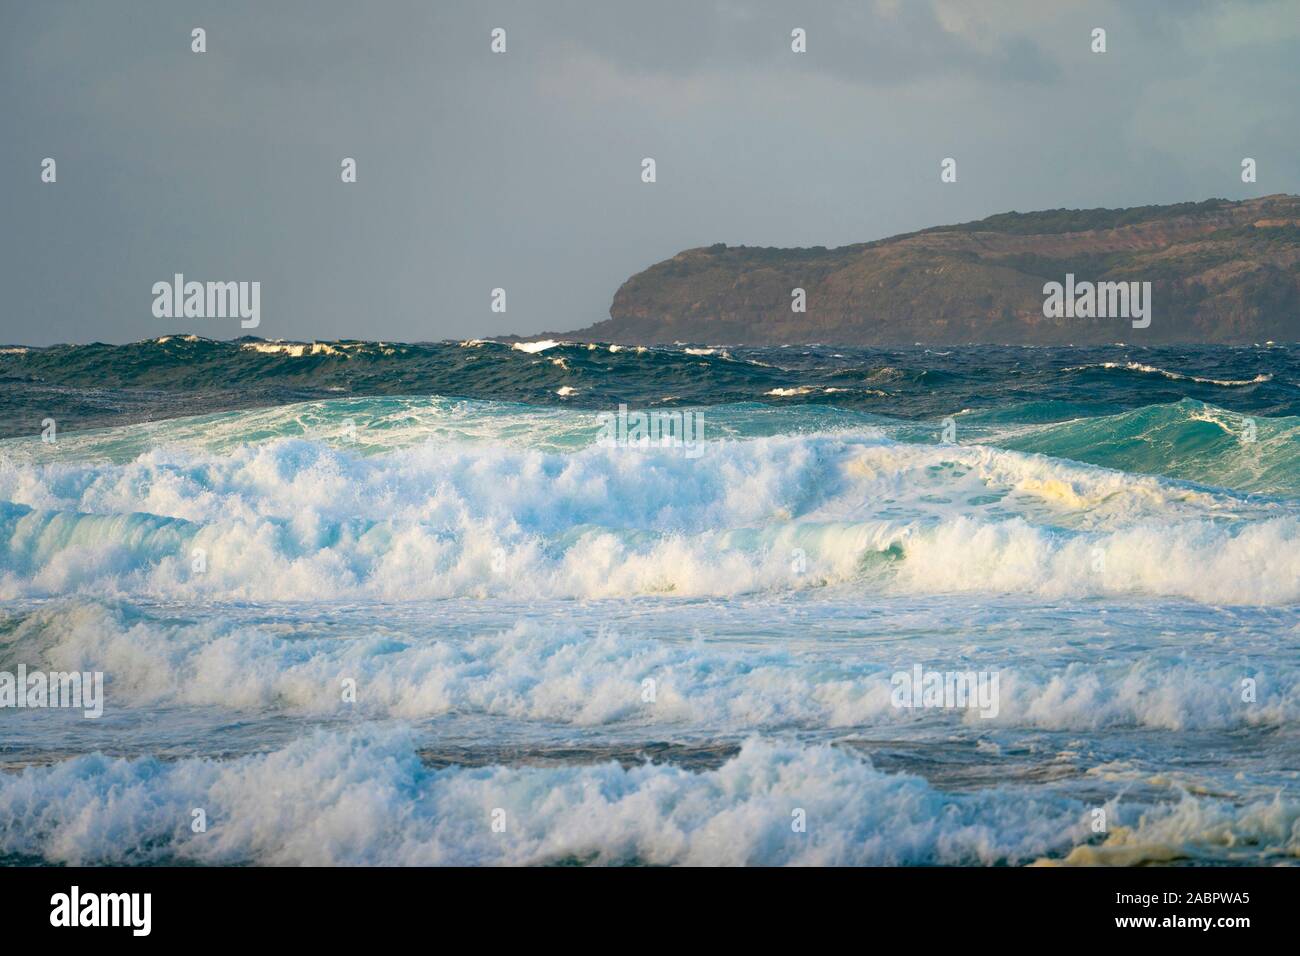 Rough seas over the notorious Bar between Norfolk and Nepean Islands. Many Norfolk Island cemetery tombstones attest drownings from when Nepean Island Stock Photo